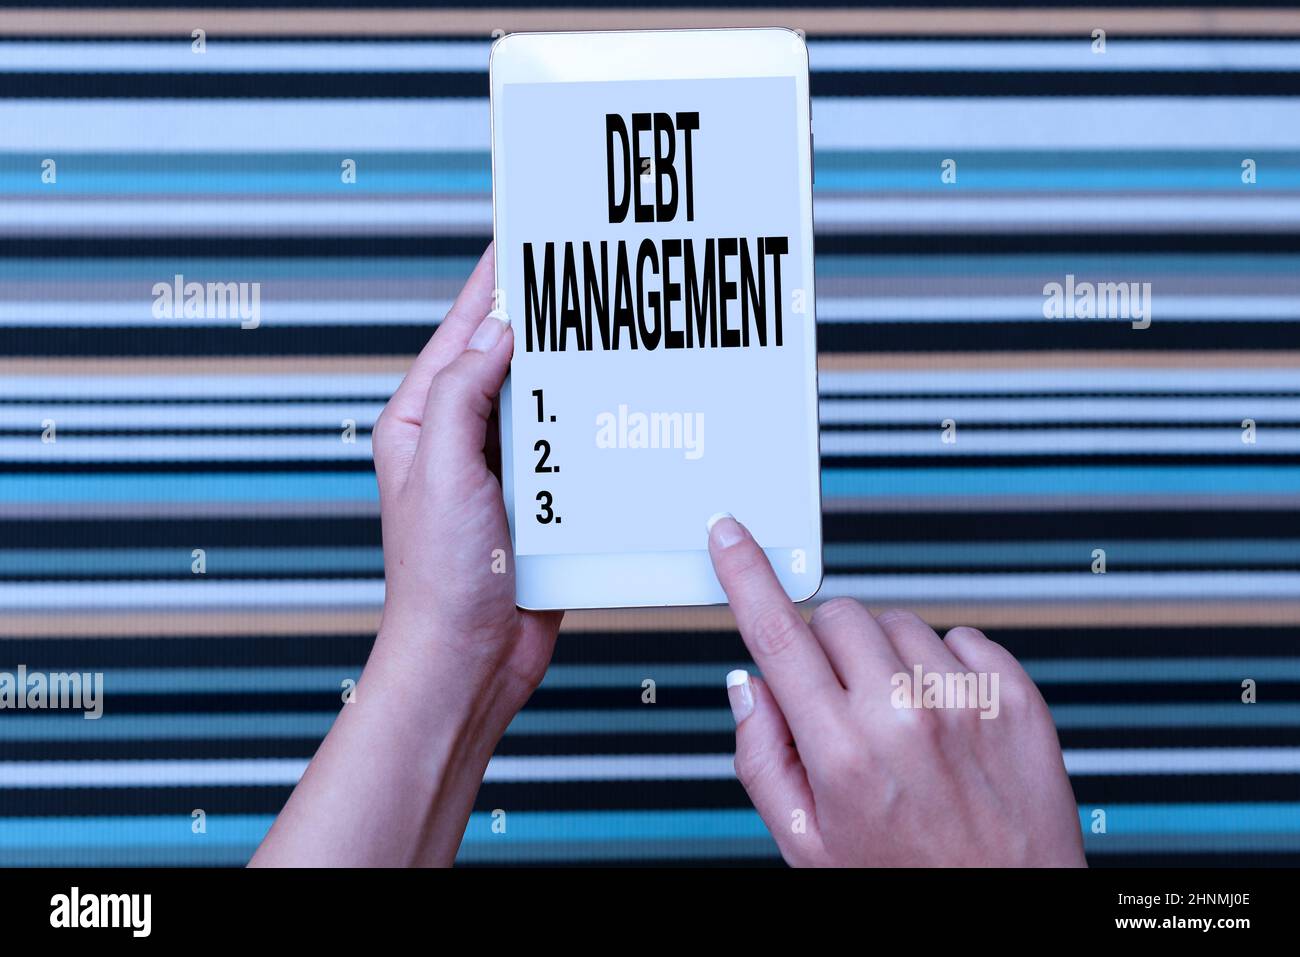 Text showing inspiration Debt Management, Word Written on The formal agreement between a debtor and a creditor Voice And Video Calling Capabilities Co Stock Photo